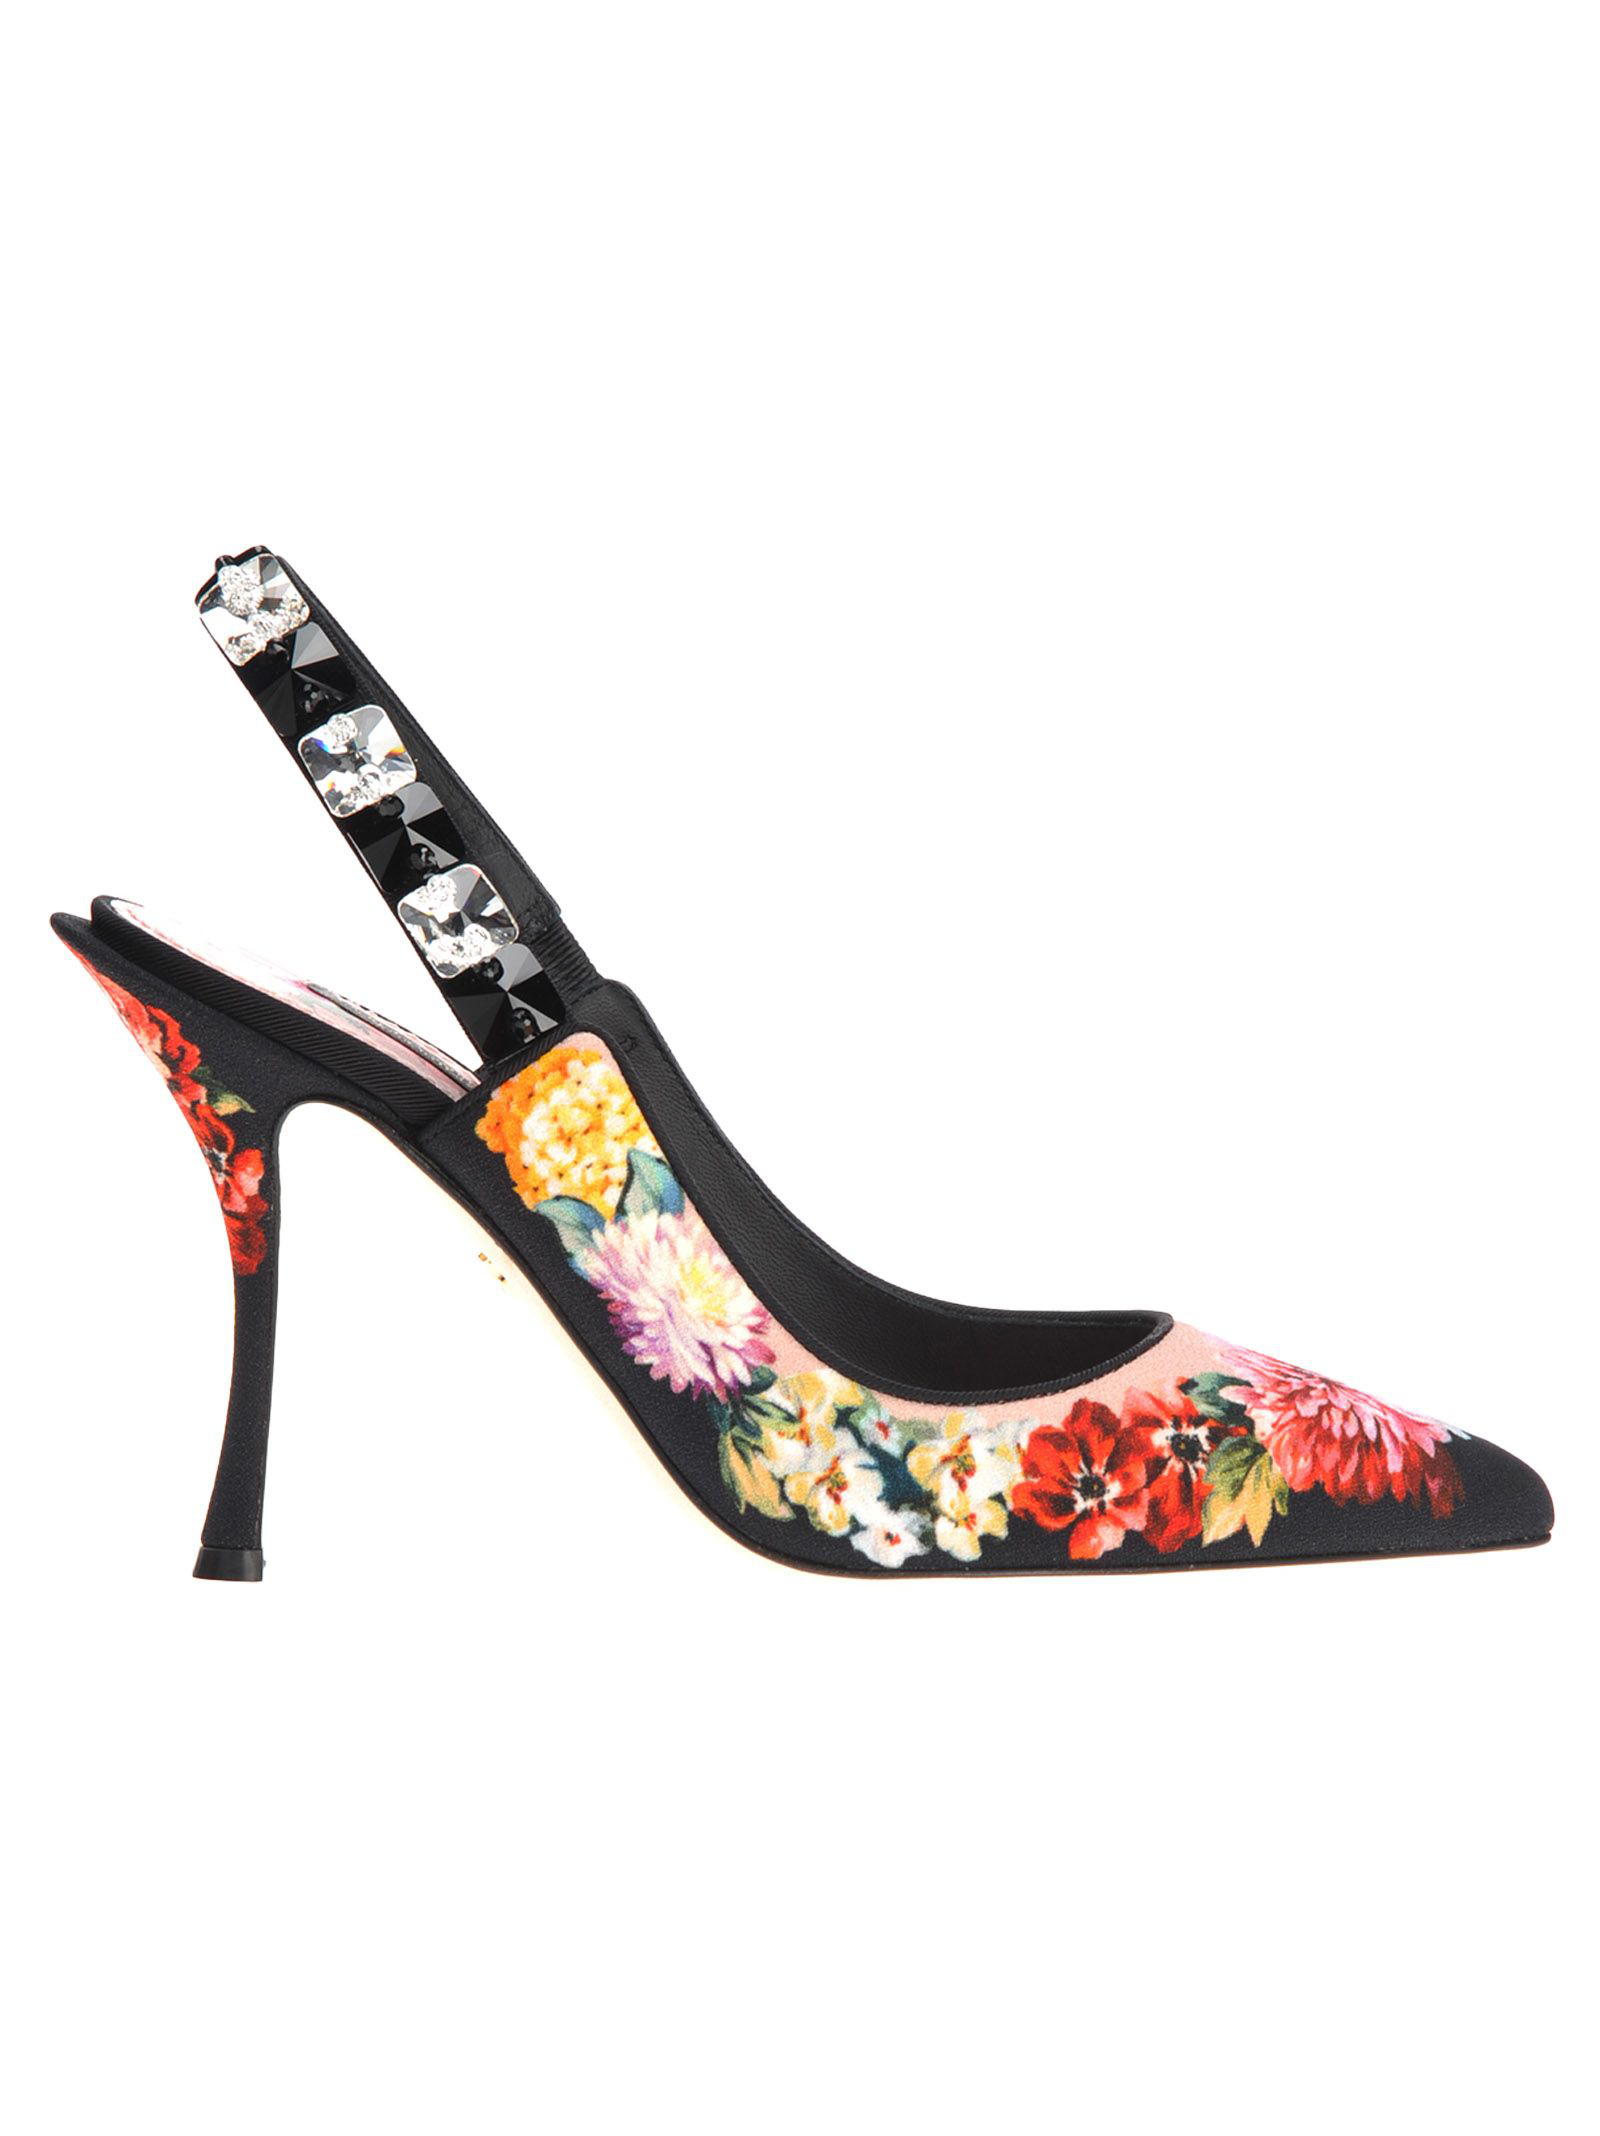 dolce and gabbana floral heels